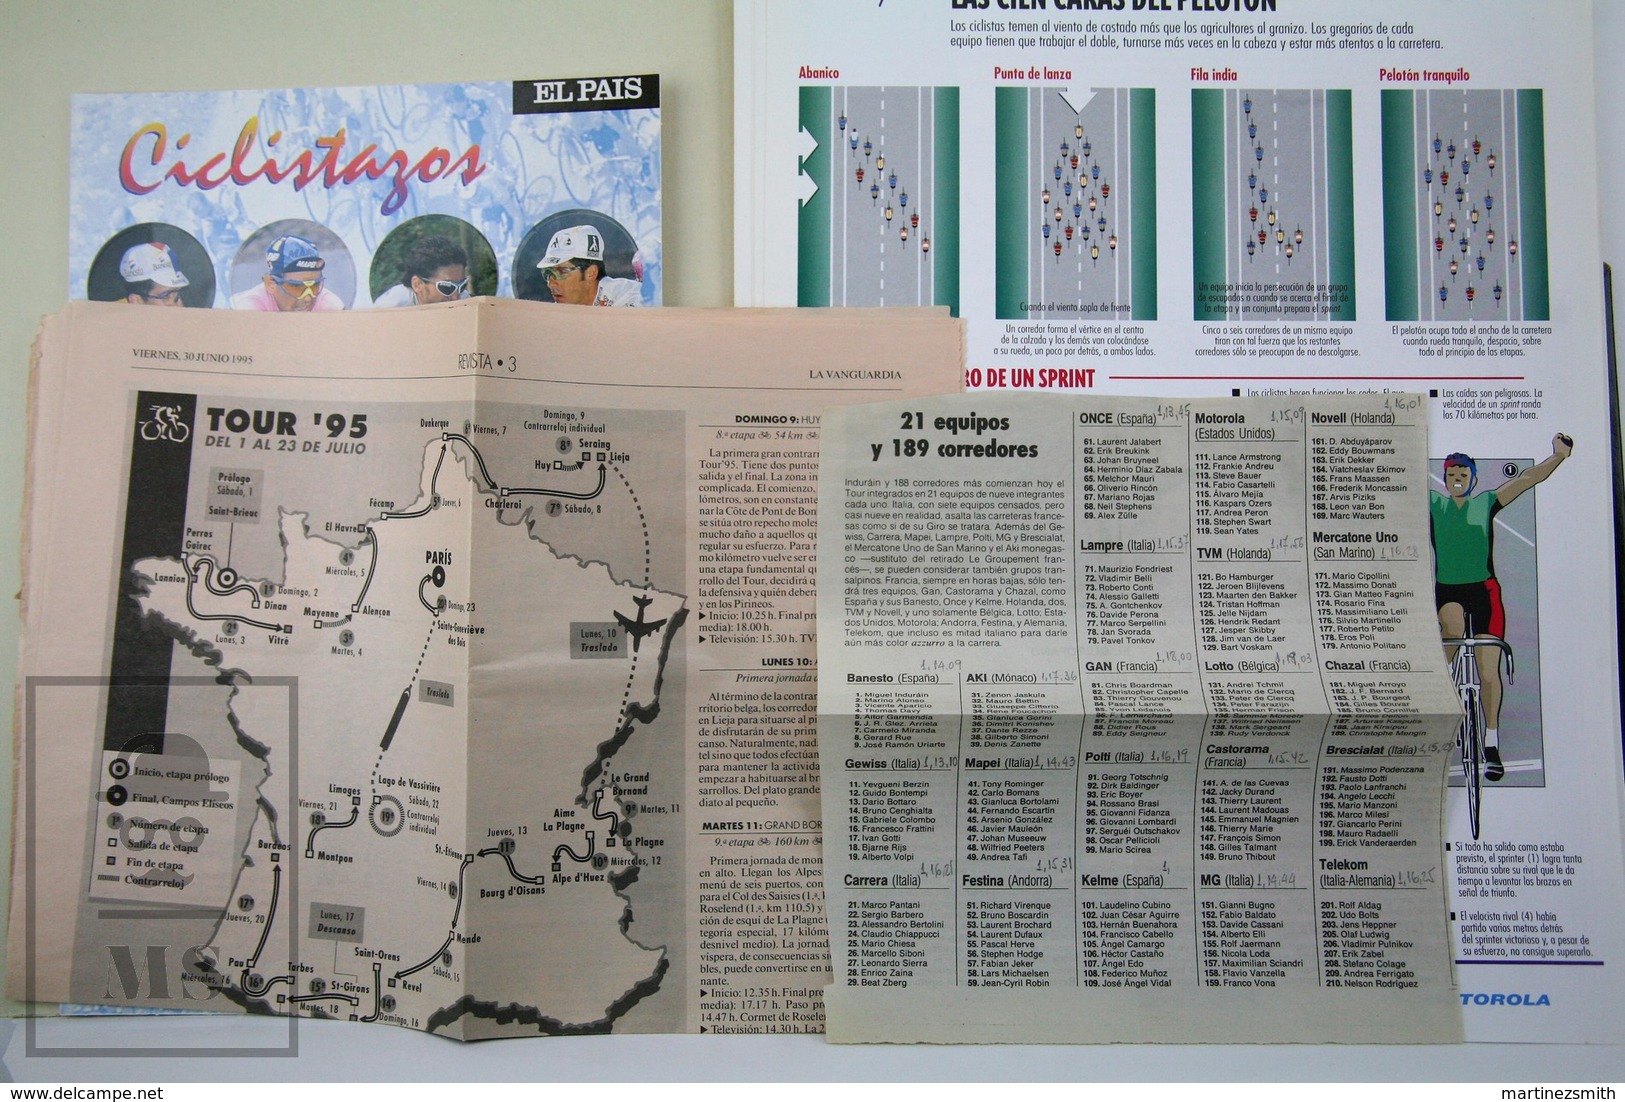 The Tour of France 1995 - Spanish Folder with Collectible Sheets and Collection of Cycling Round Cards